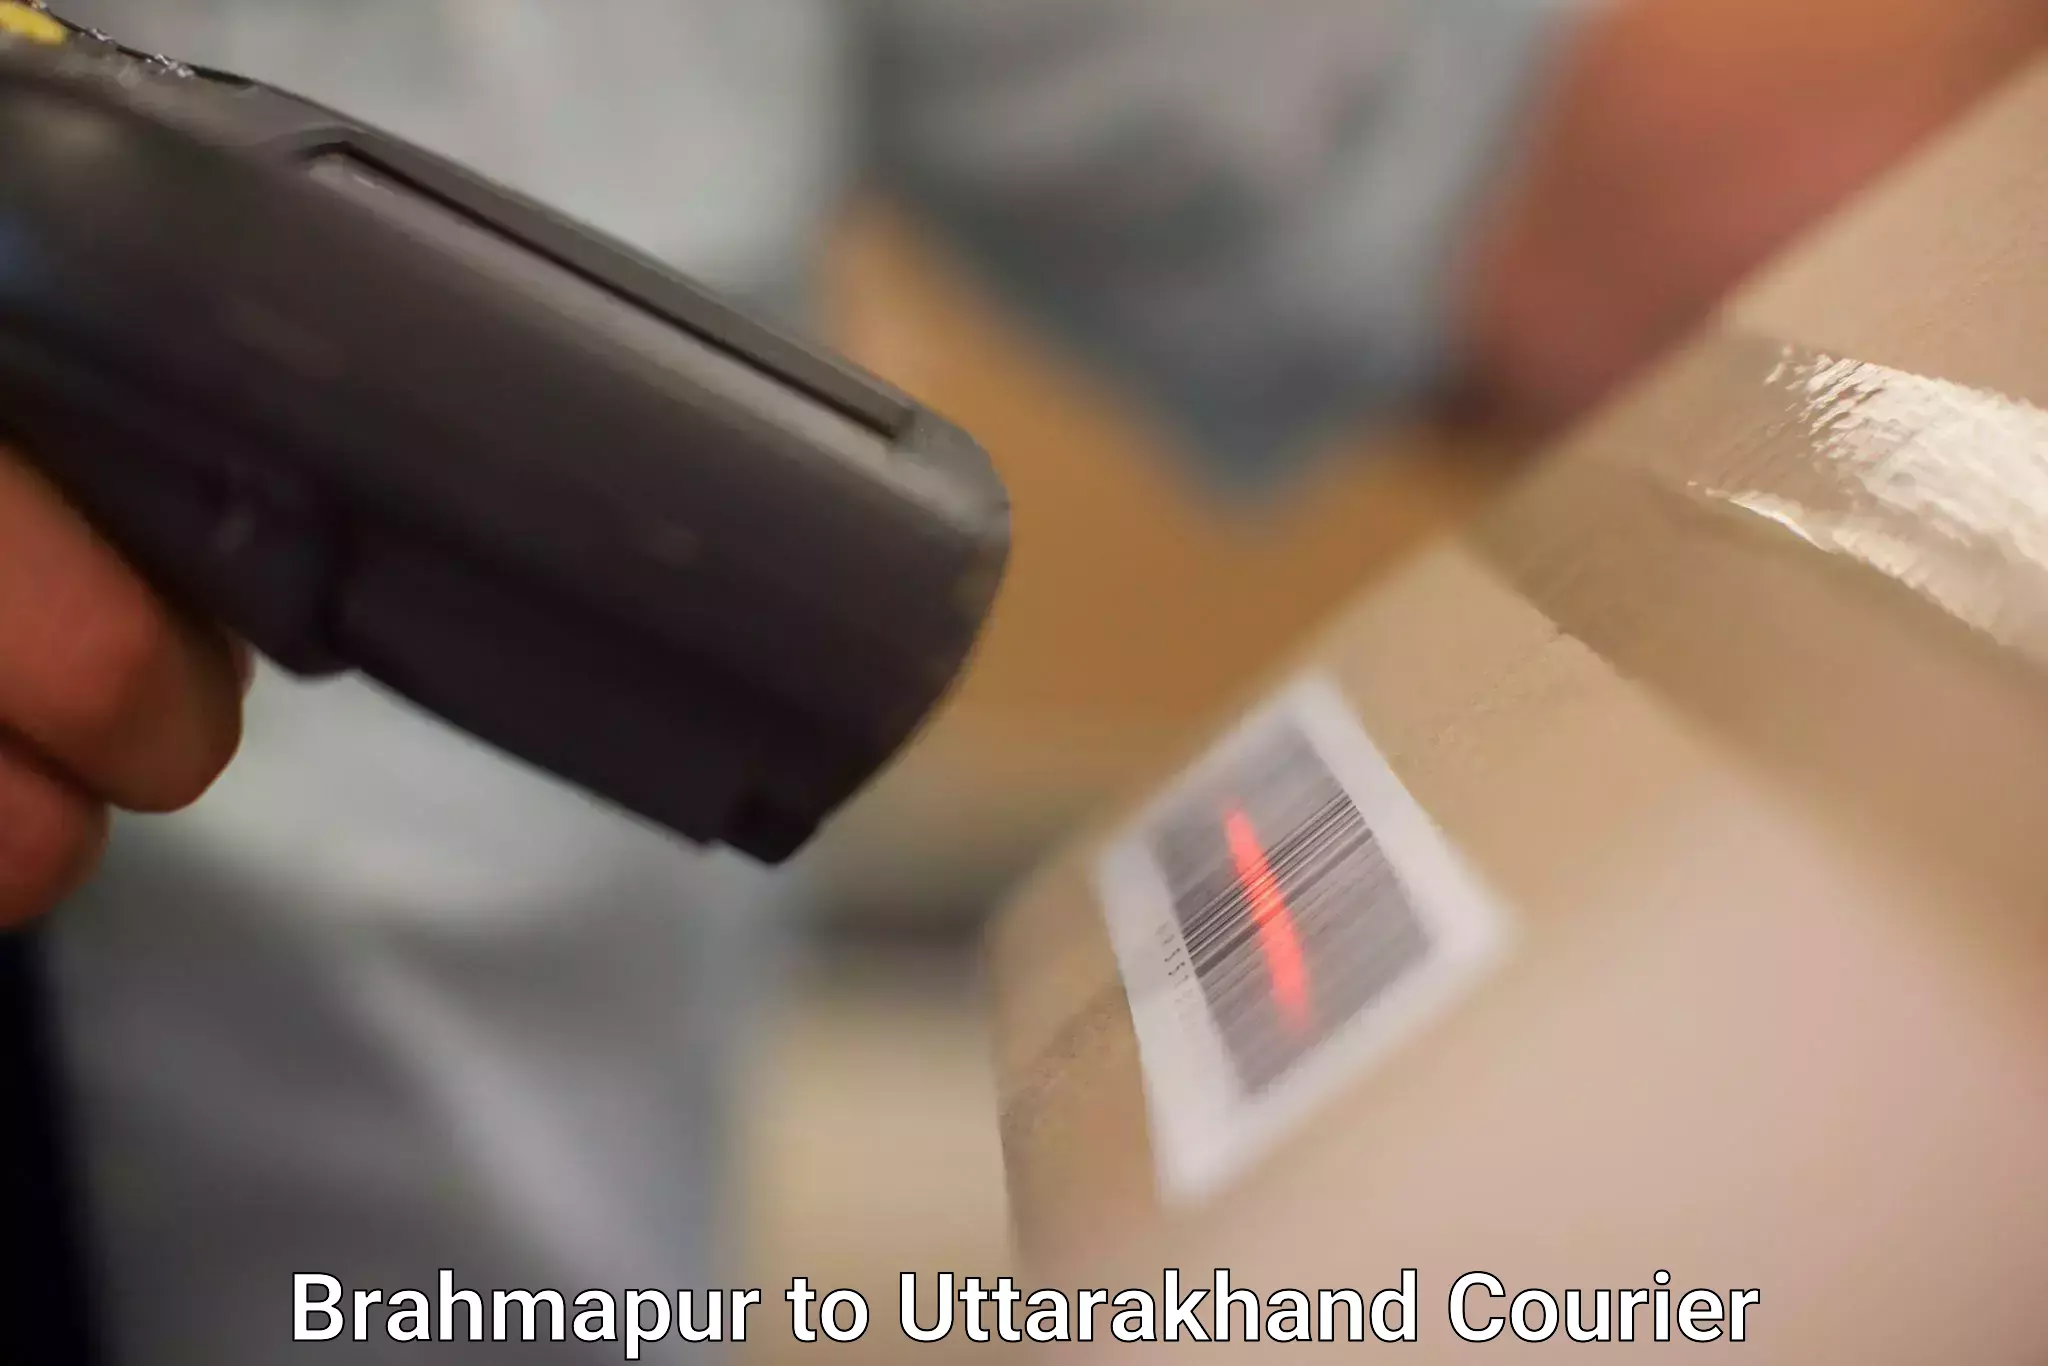 State-of-the-art courier technology Brahmapur to Chamoli